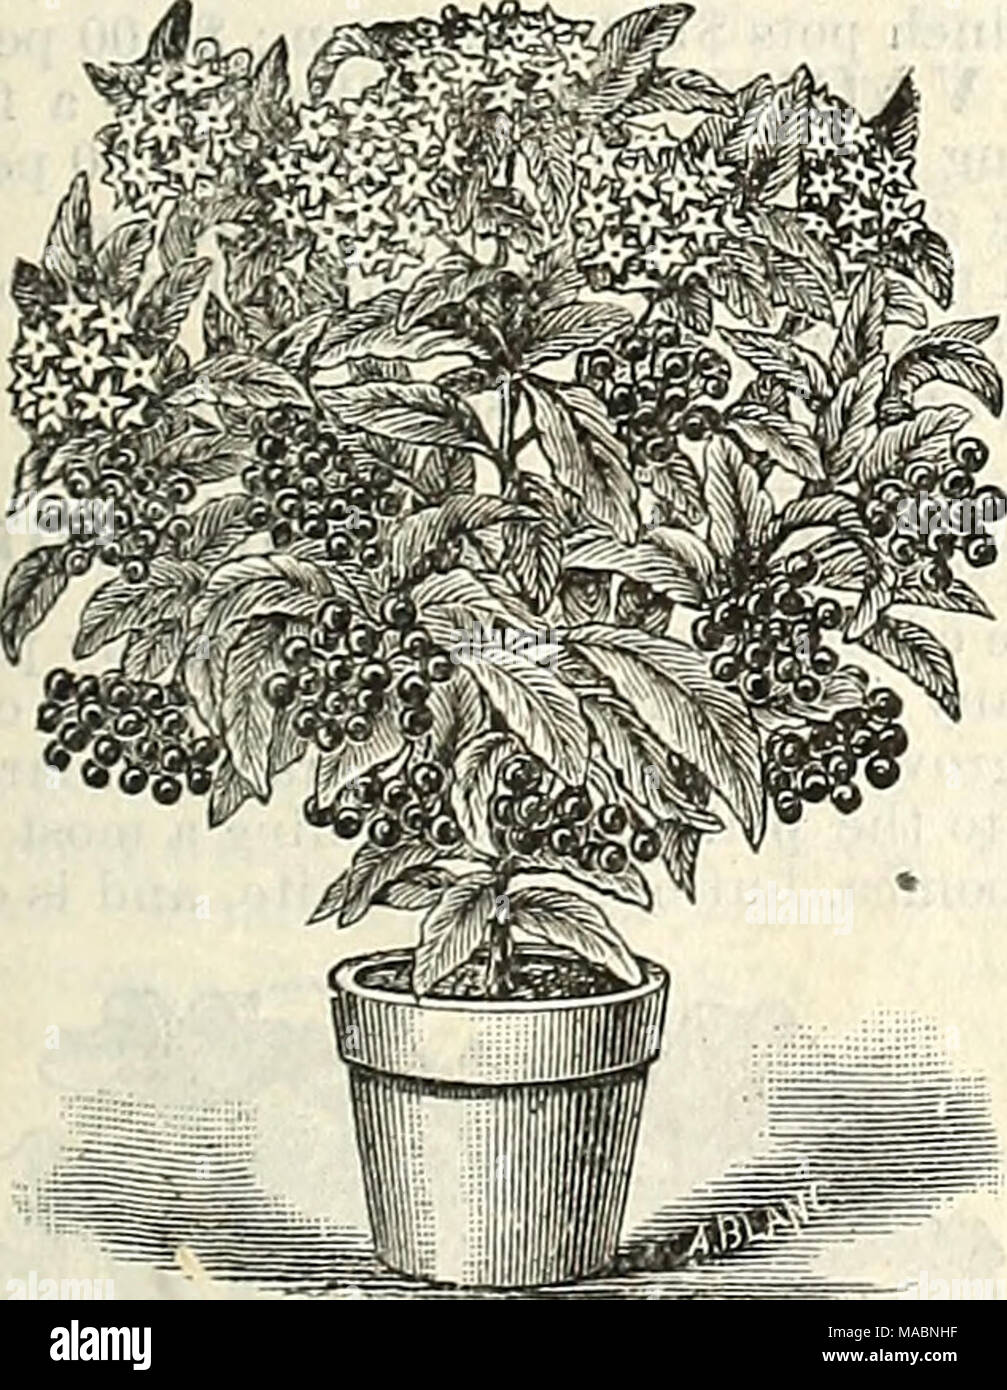 . Dreer's quarterly wholesale price list of seeds, plants &amp;c. : winter edition January 1895 March . Ardisia Crispa. We have fine lots of this most useful plant for holiday use in fine young stock for growing on. 2^ inch pots, 75 cts per doz.; $6.00 per 100. 3 &quot; &quot; 1.25 ' &quot; 10.00 4 &quot; &quot; that will fruit the coming season, $3.50 per dozen. 5 &quot; '* that will fruit the coming season, $5.00 per dozen. Aristolochia Sipho. (DUTCHMAN'S PIPE VINE.) We offer an extra fine stock of this most useful hardy climber in extra strong long vines. §4.00 per doz.; $30.00 per 100. Stock Photo